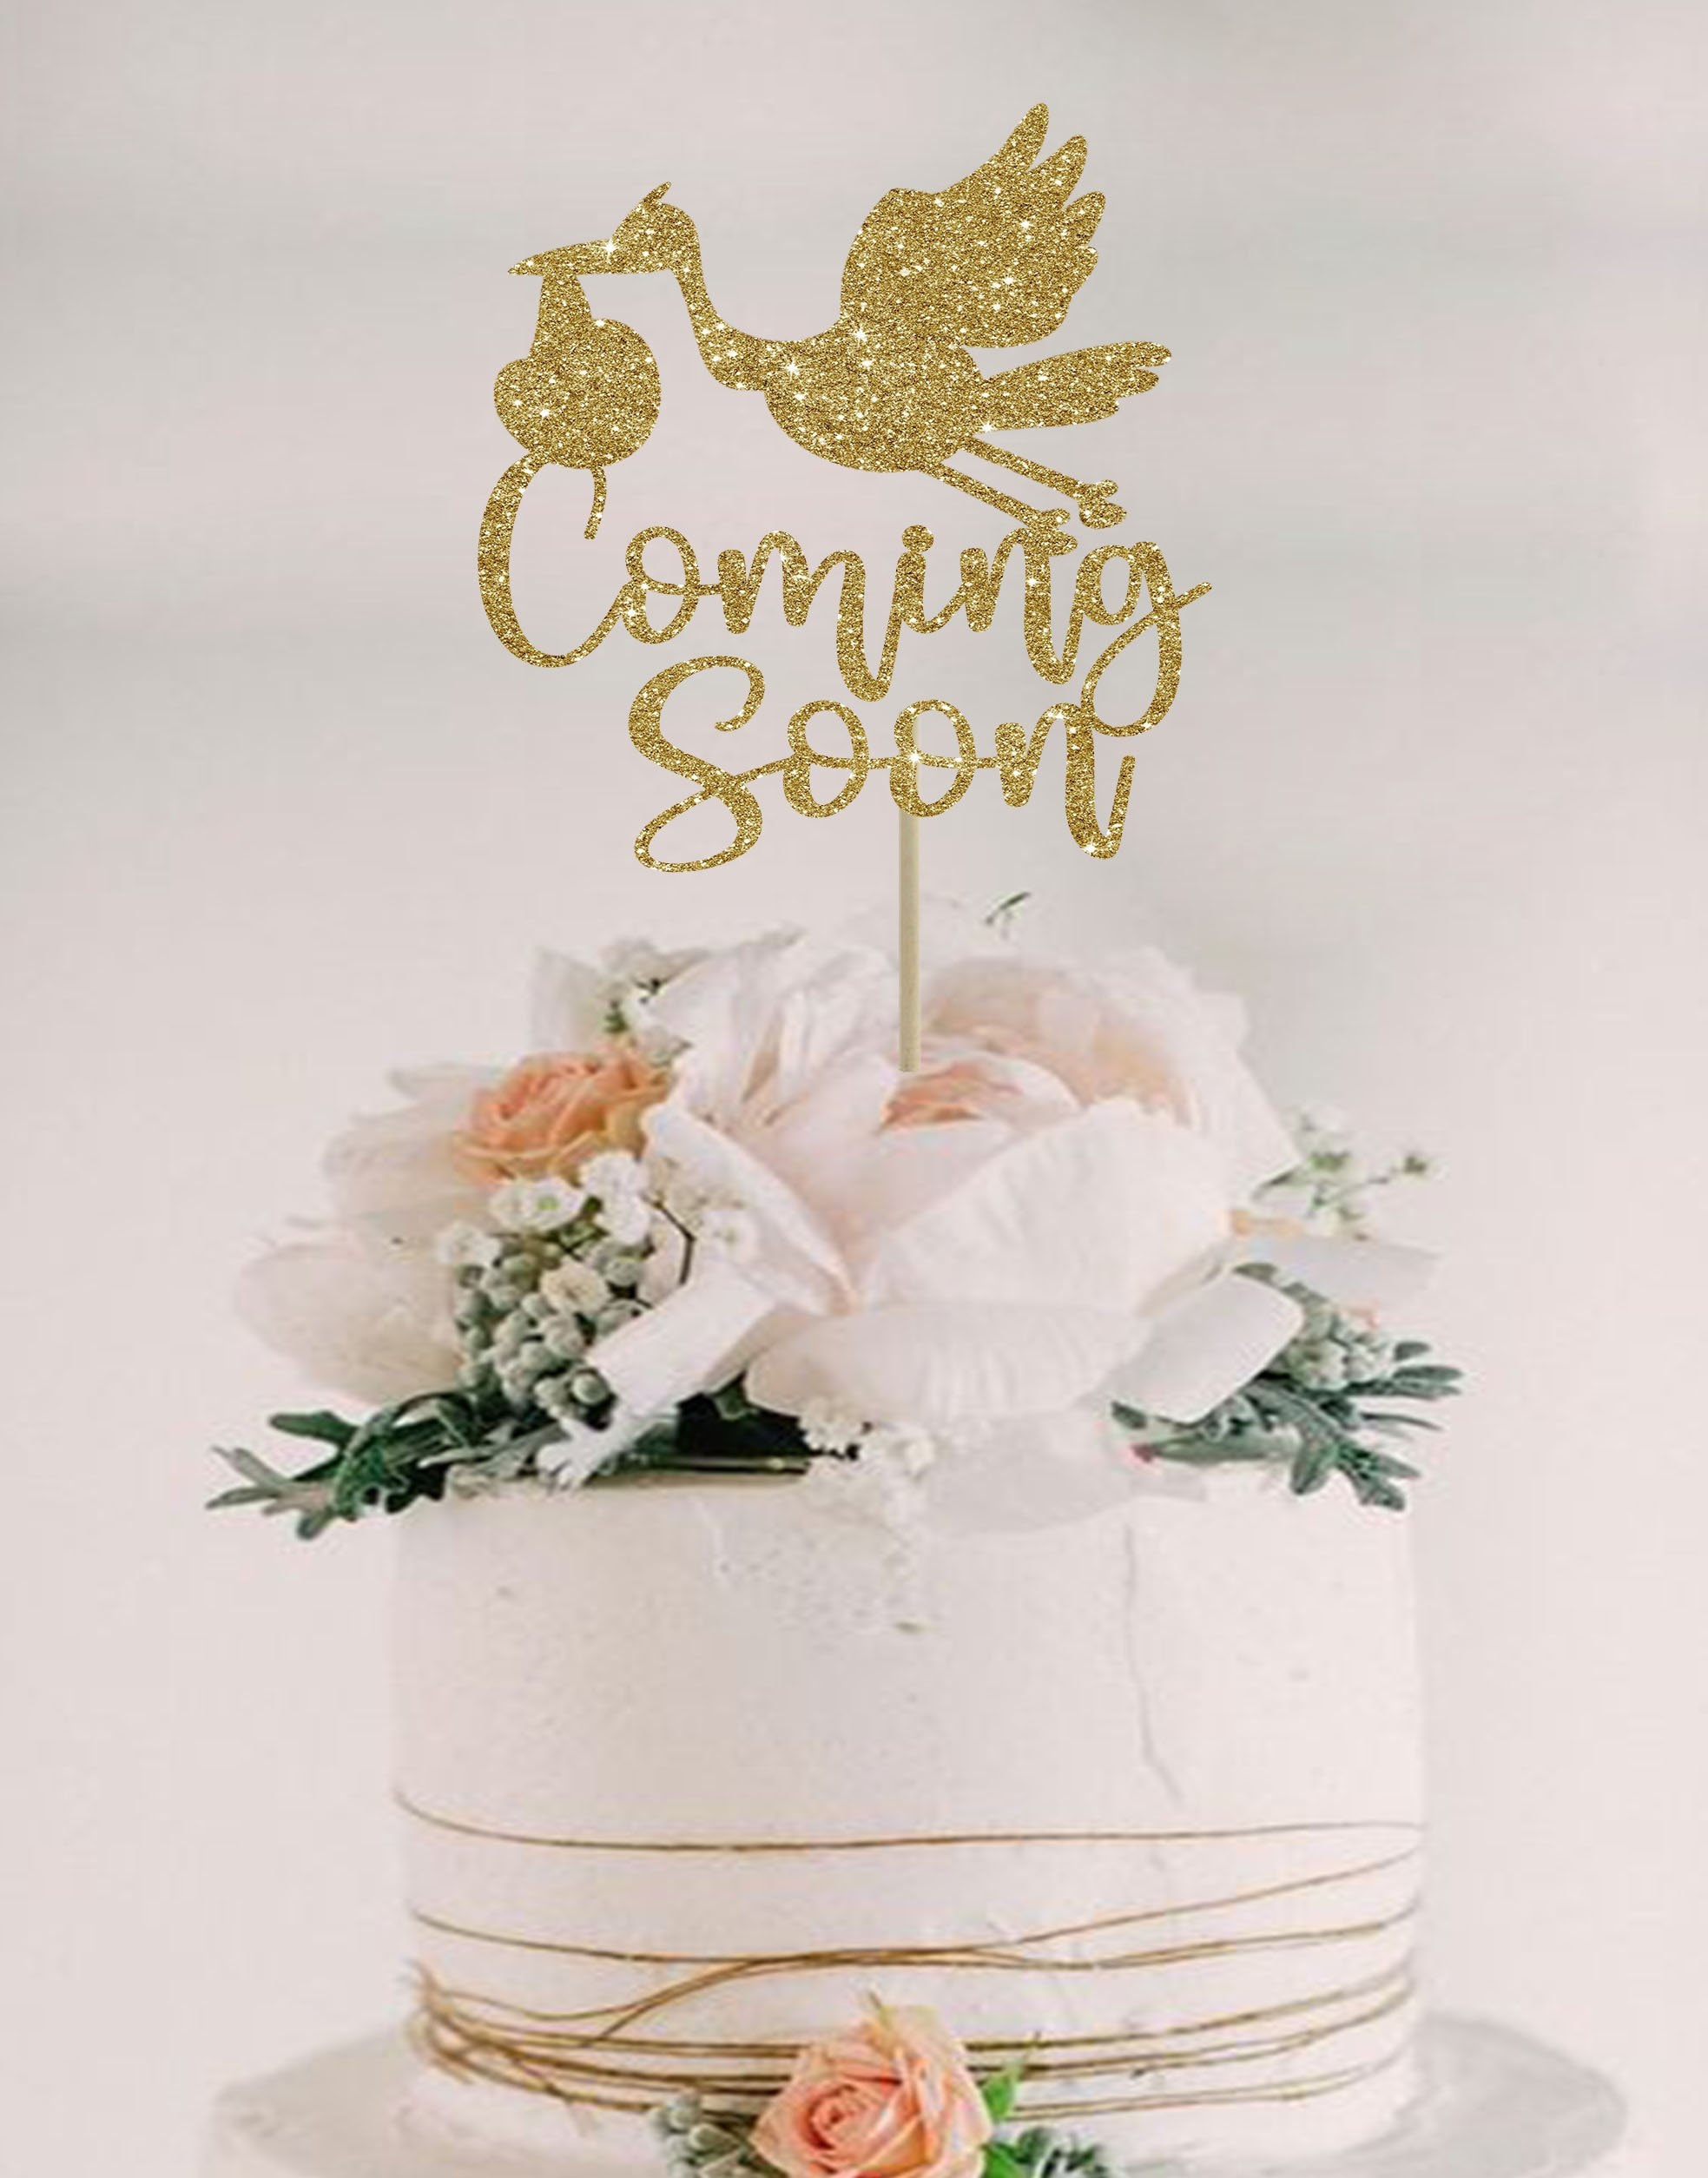 Baby cake topper gold, coming soon topper, baby shower cake topper, baby  shower decorations, elegant cake topper. stork silhouette